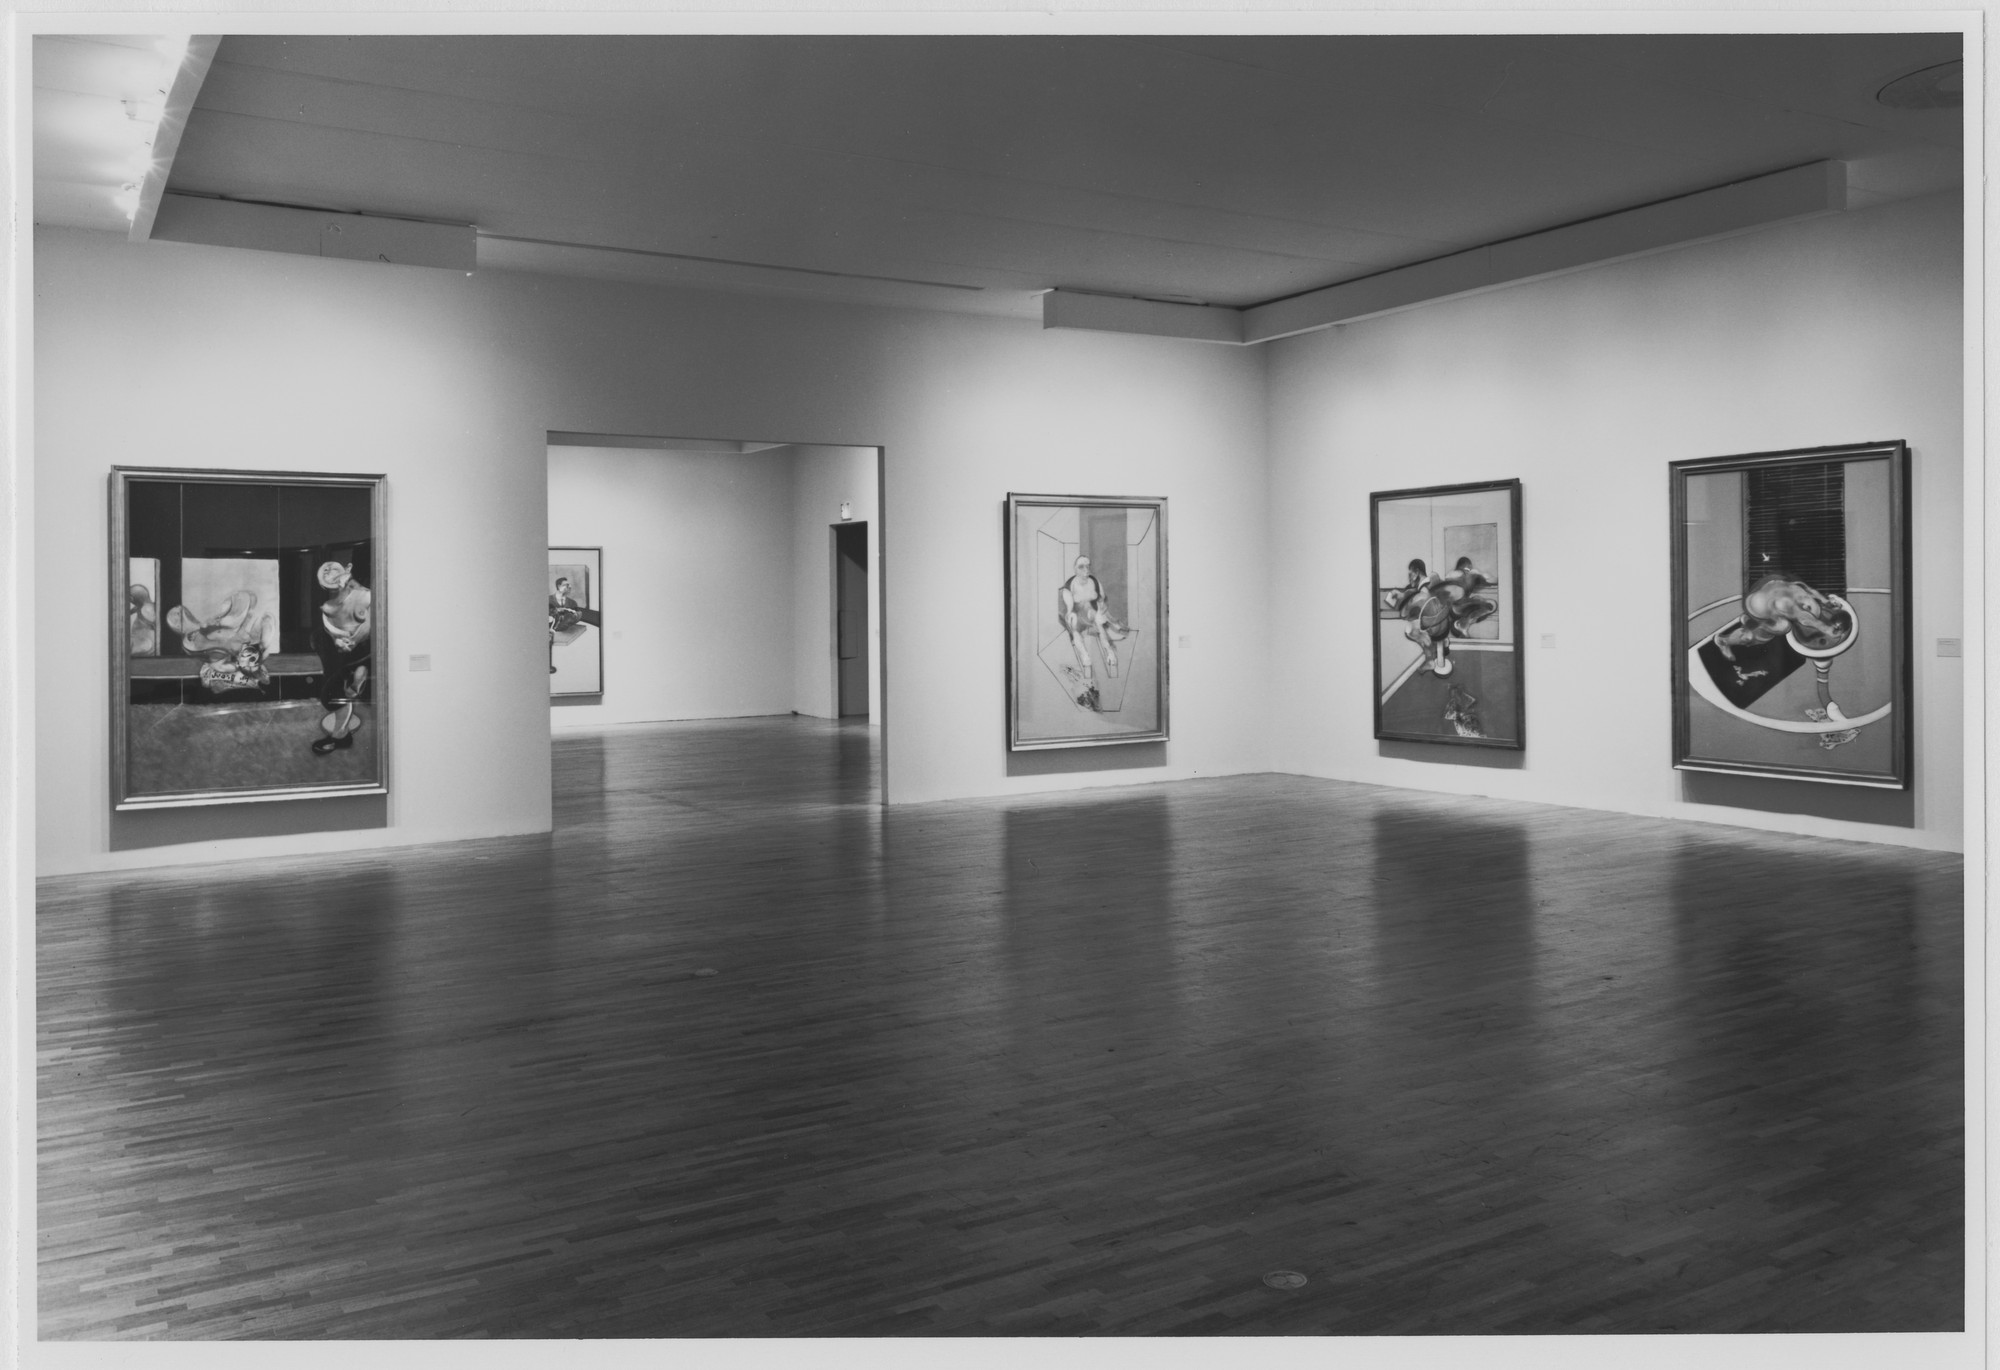 Installation view of the exhibition "Francis Bacon" MoMA